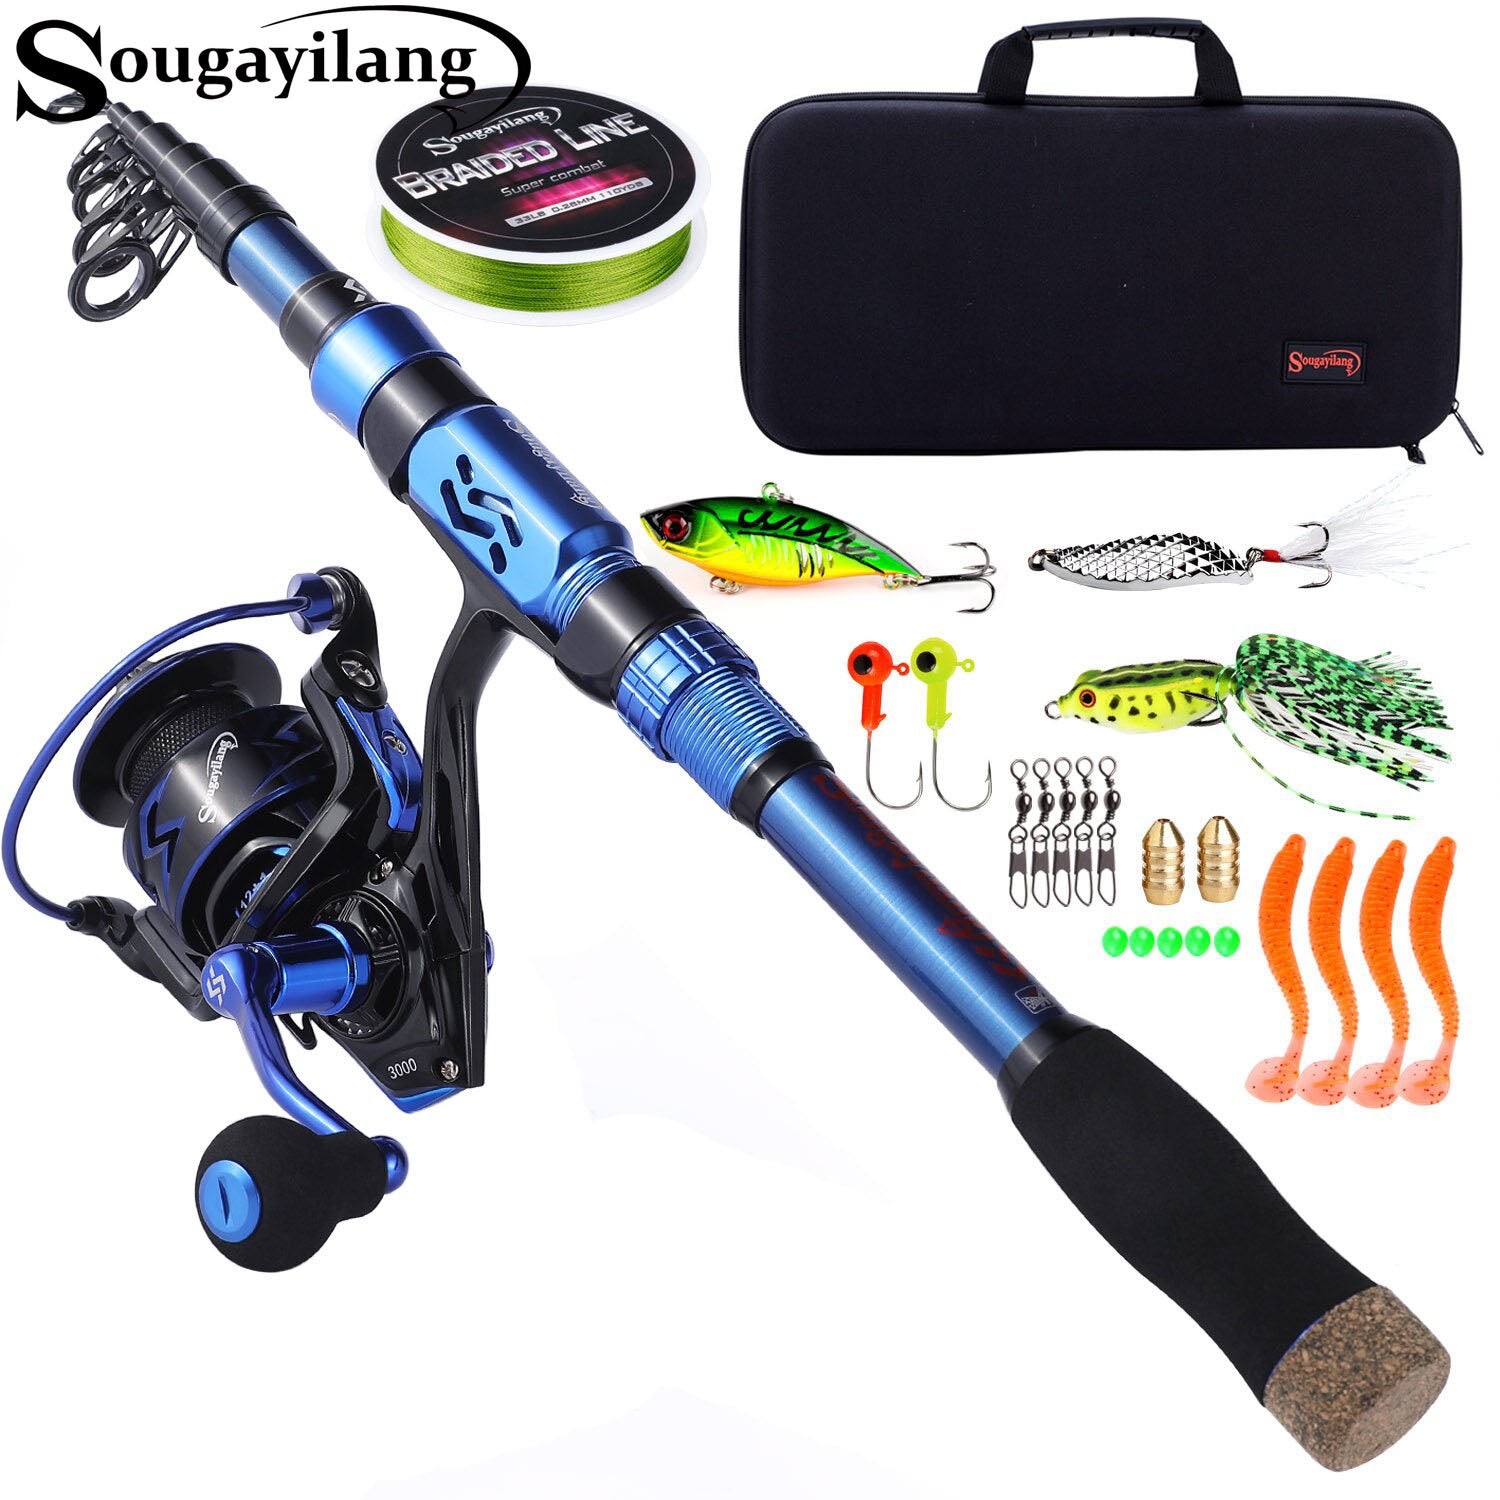  Portable Fishing Rods Telescopic Fishing Rod Set Ultralight  Weight Rod Spinning Reel Line Lure Hook Accessories Full Kits Telescopic Fishing  Pole (Size : 1.8m Rod 1000 Reel, Color : Rod